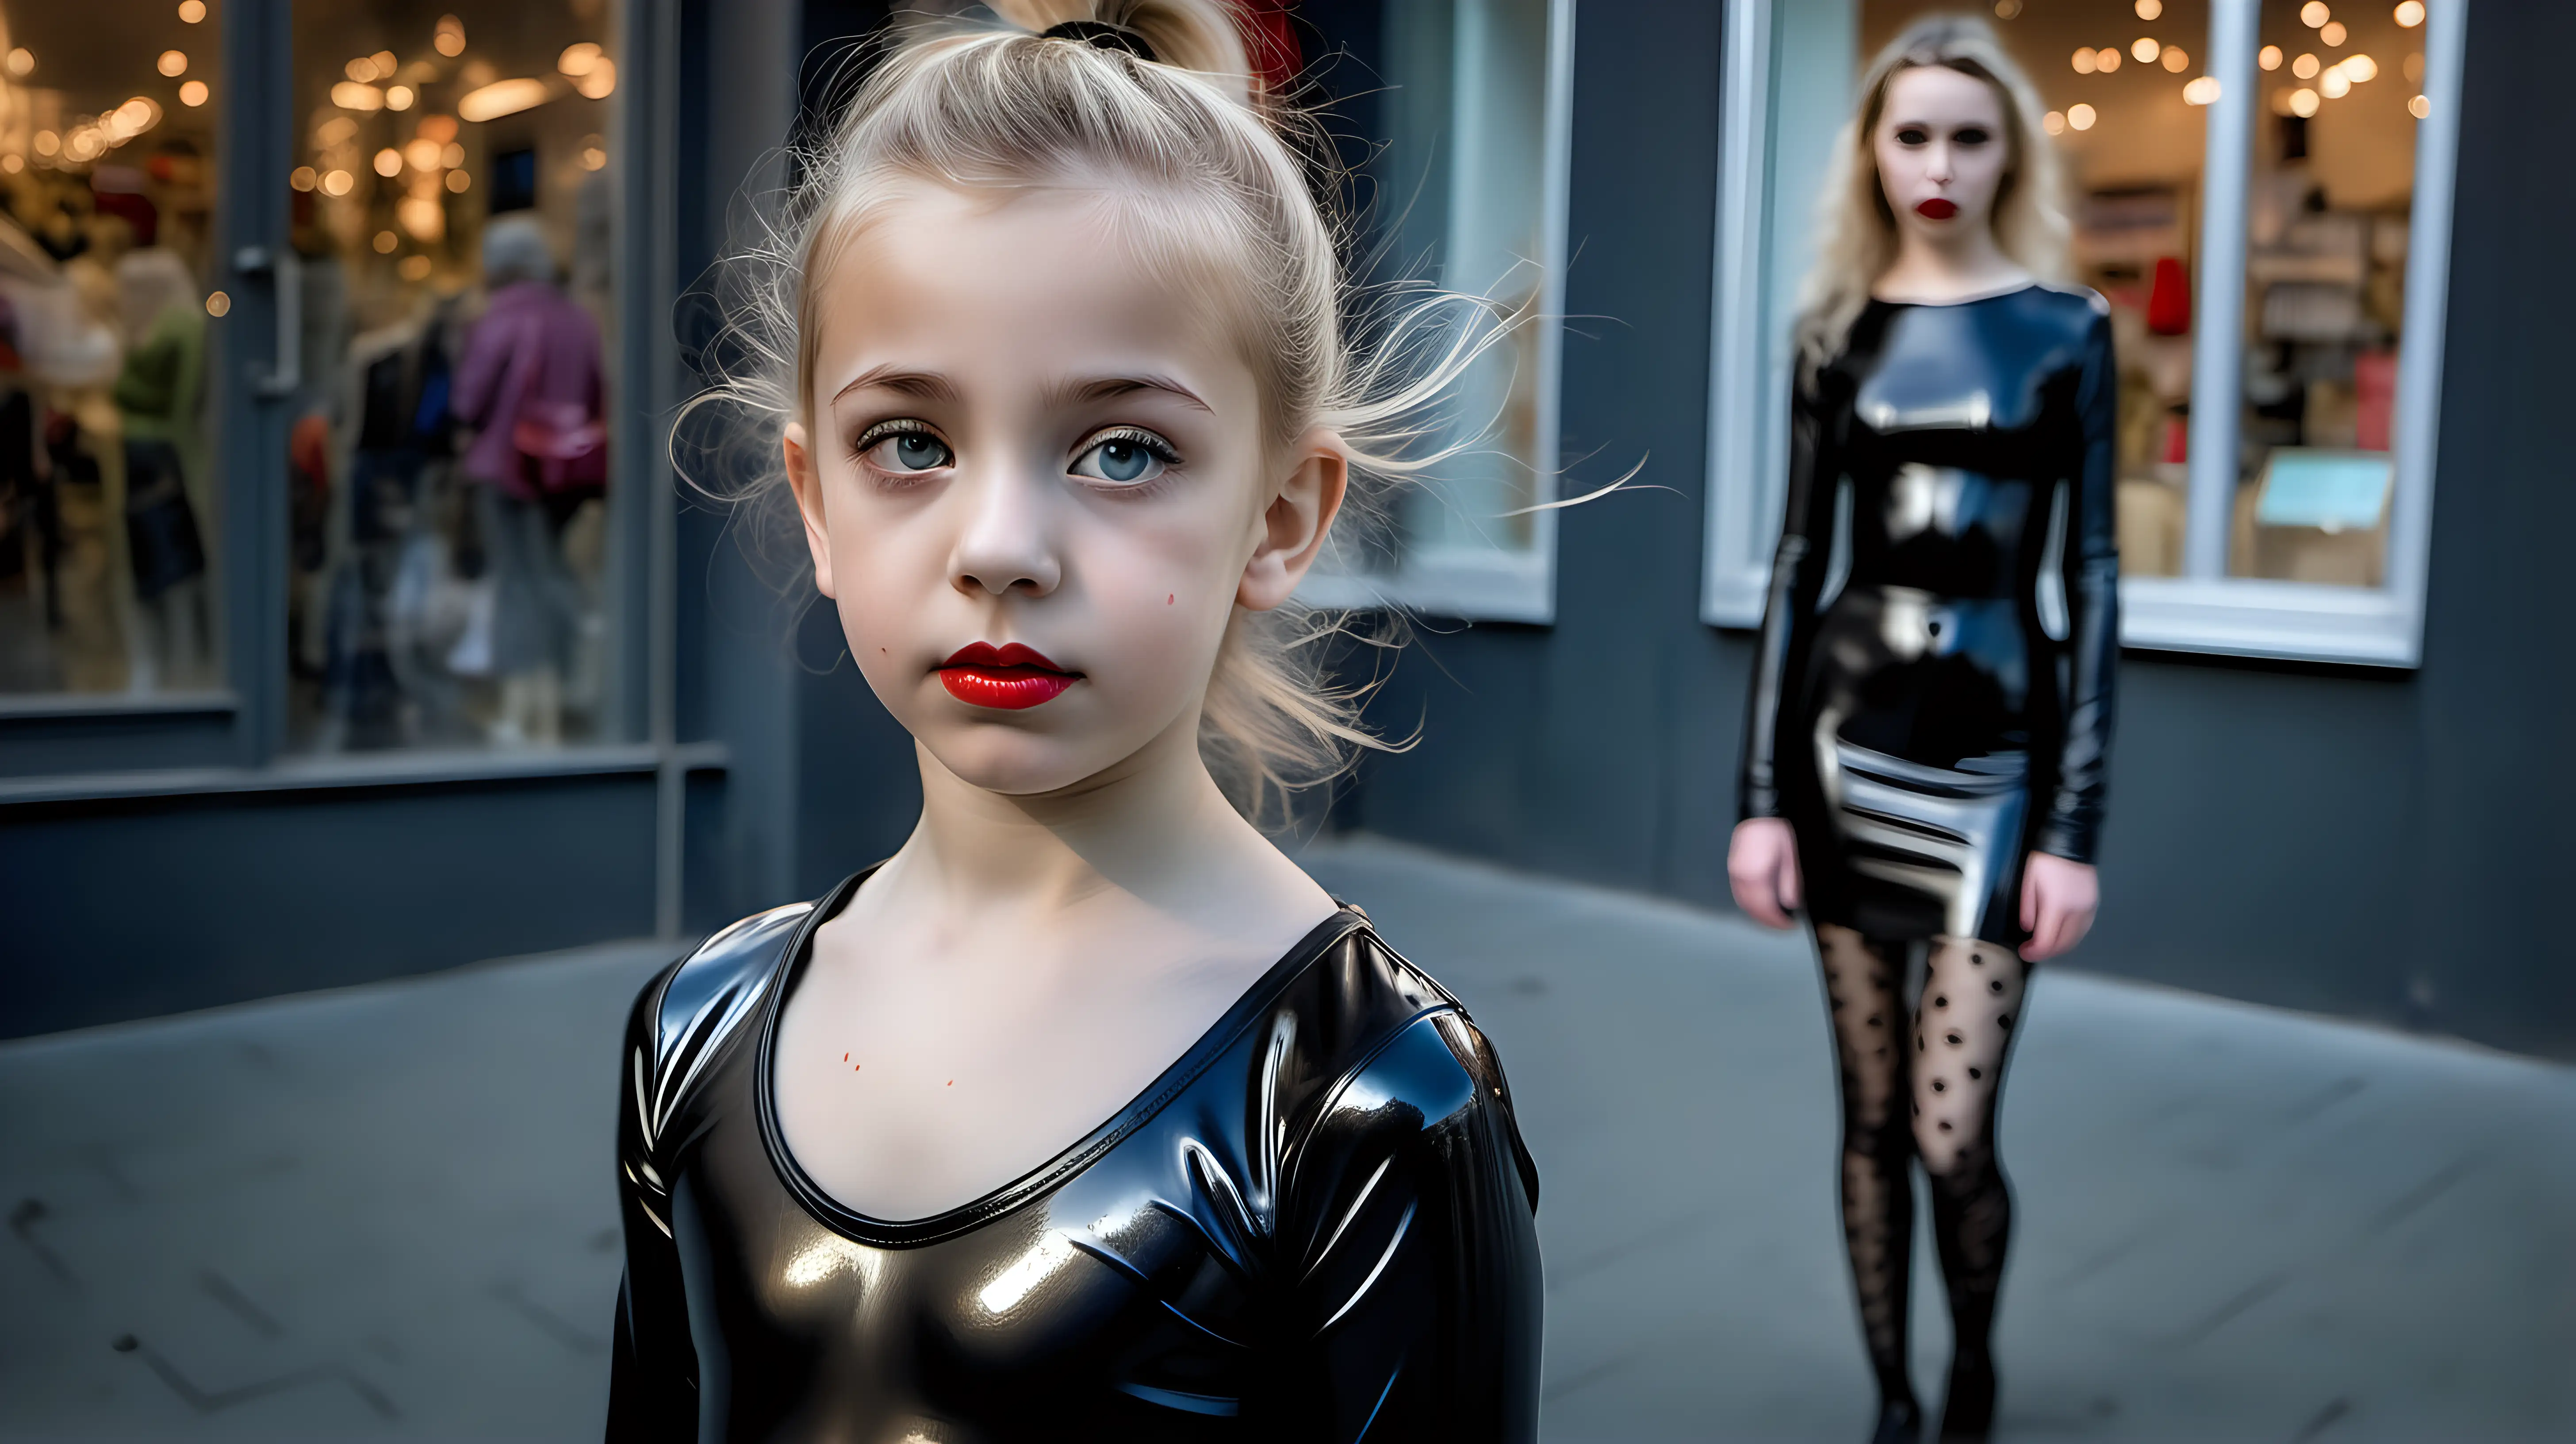 Gothic Style Two 9YearOld Girls in Cellophane Tights and Latex Fashion